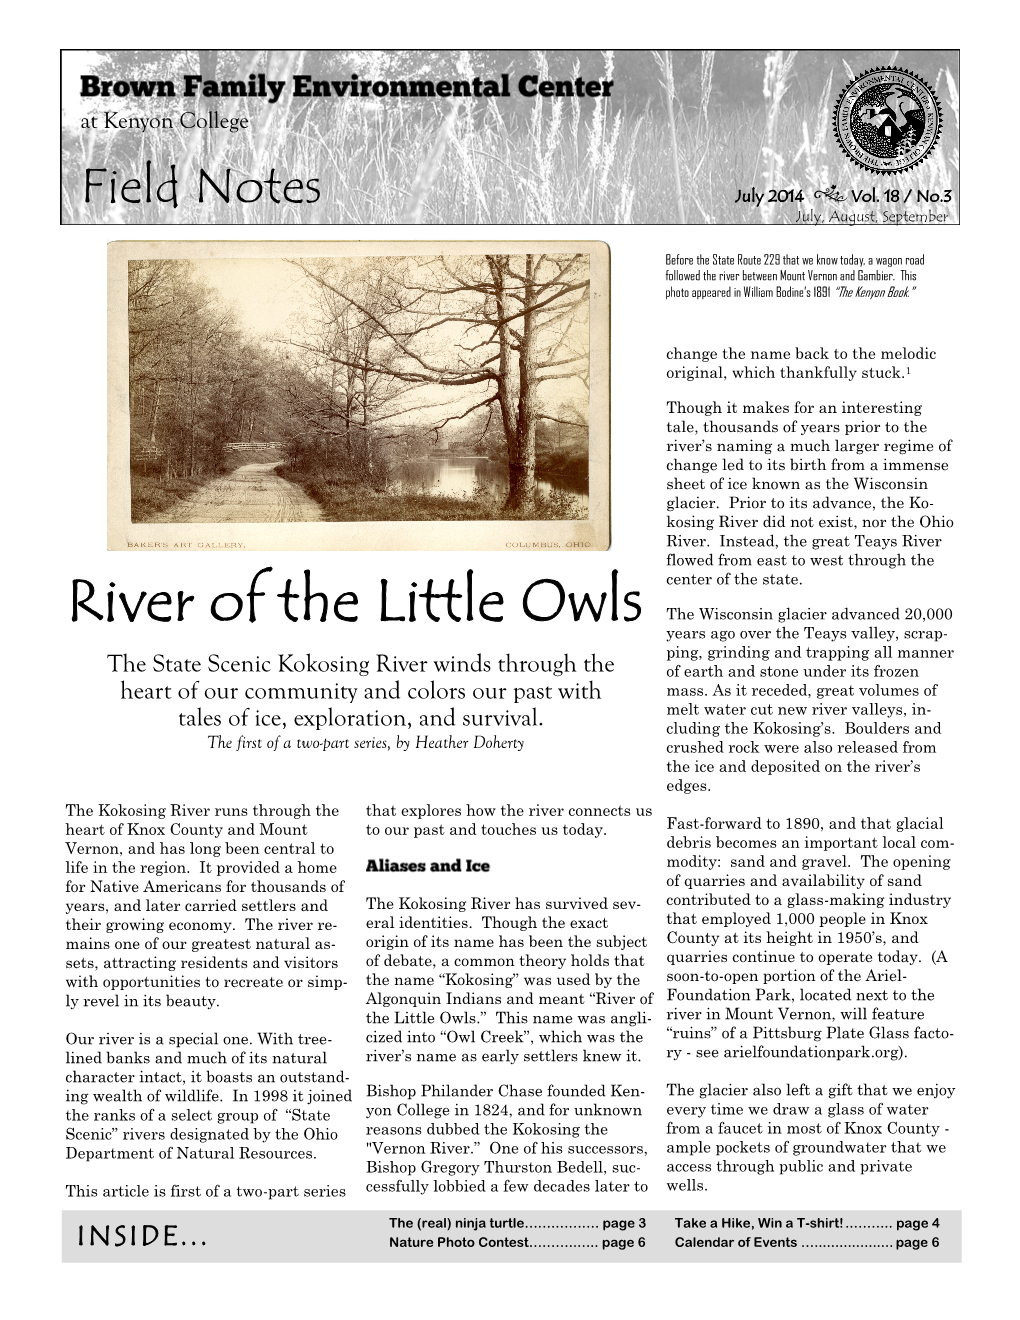 River of the Little Owls